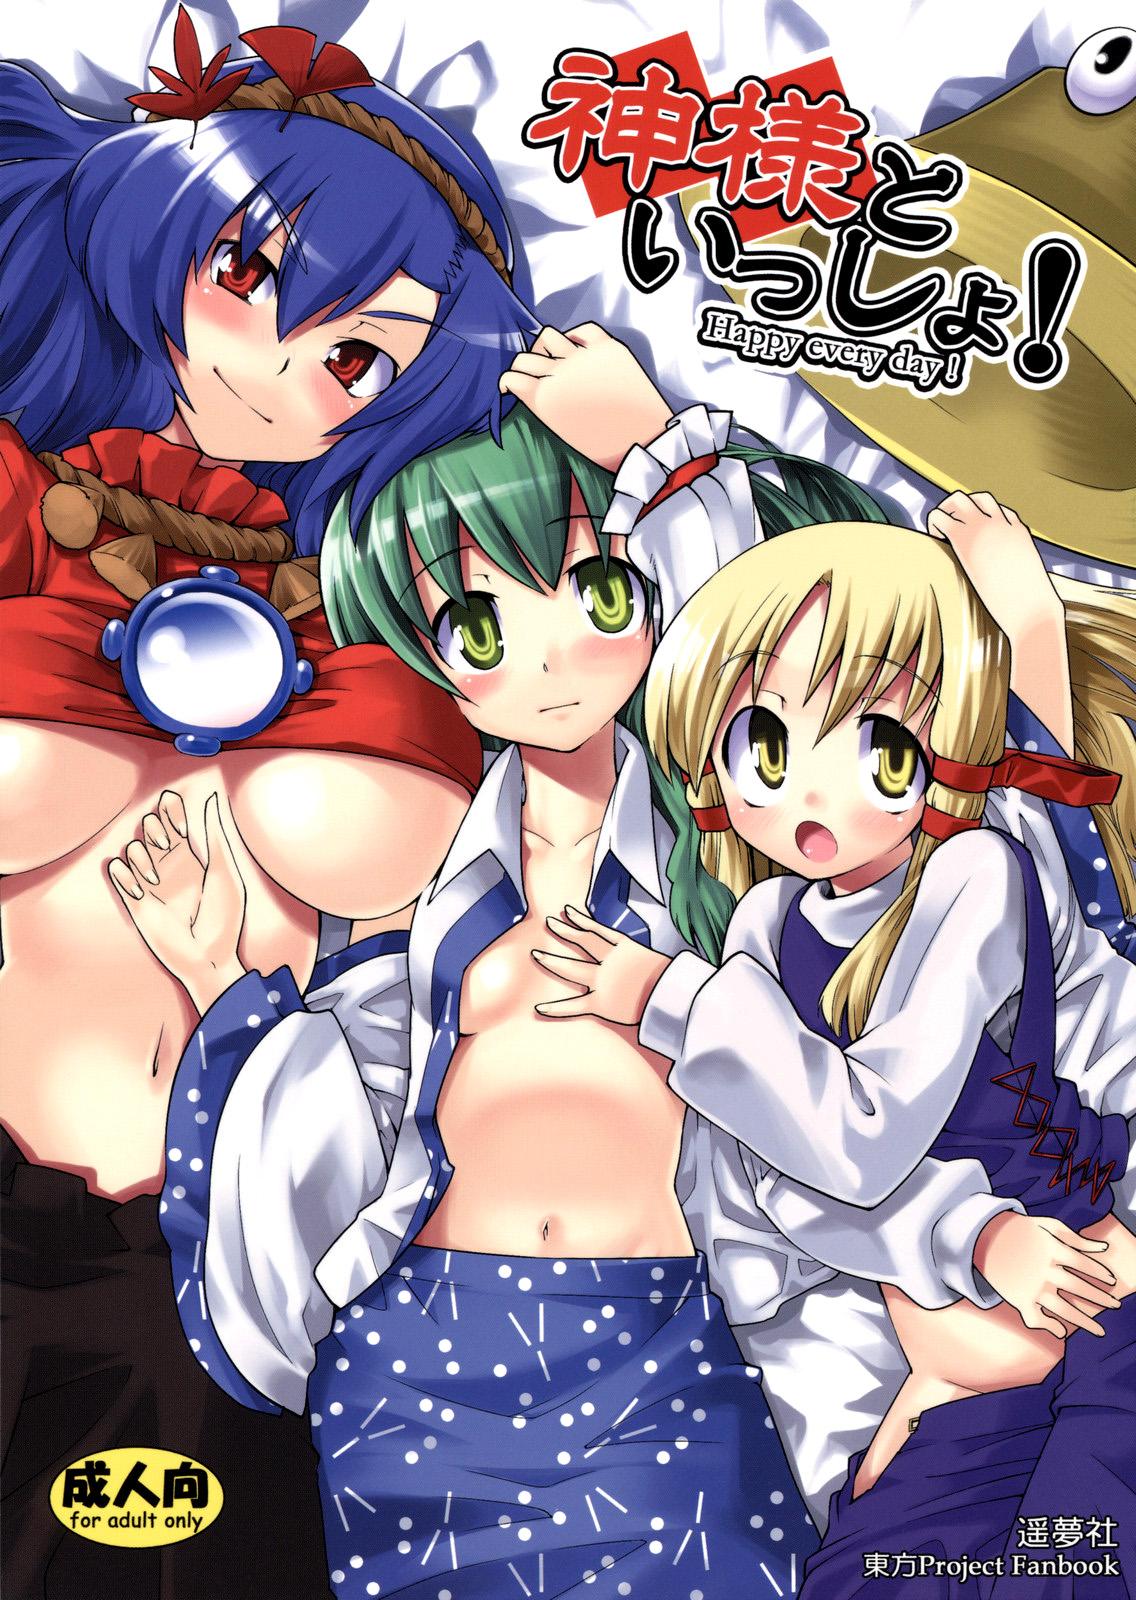 Sofa Kami-sama to Issho! Happy every day! - Touhou project Love Making - Picture 1